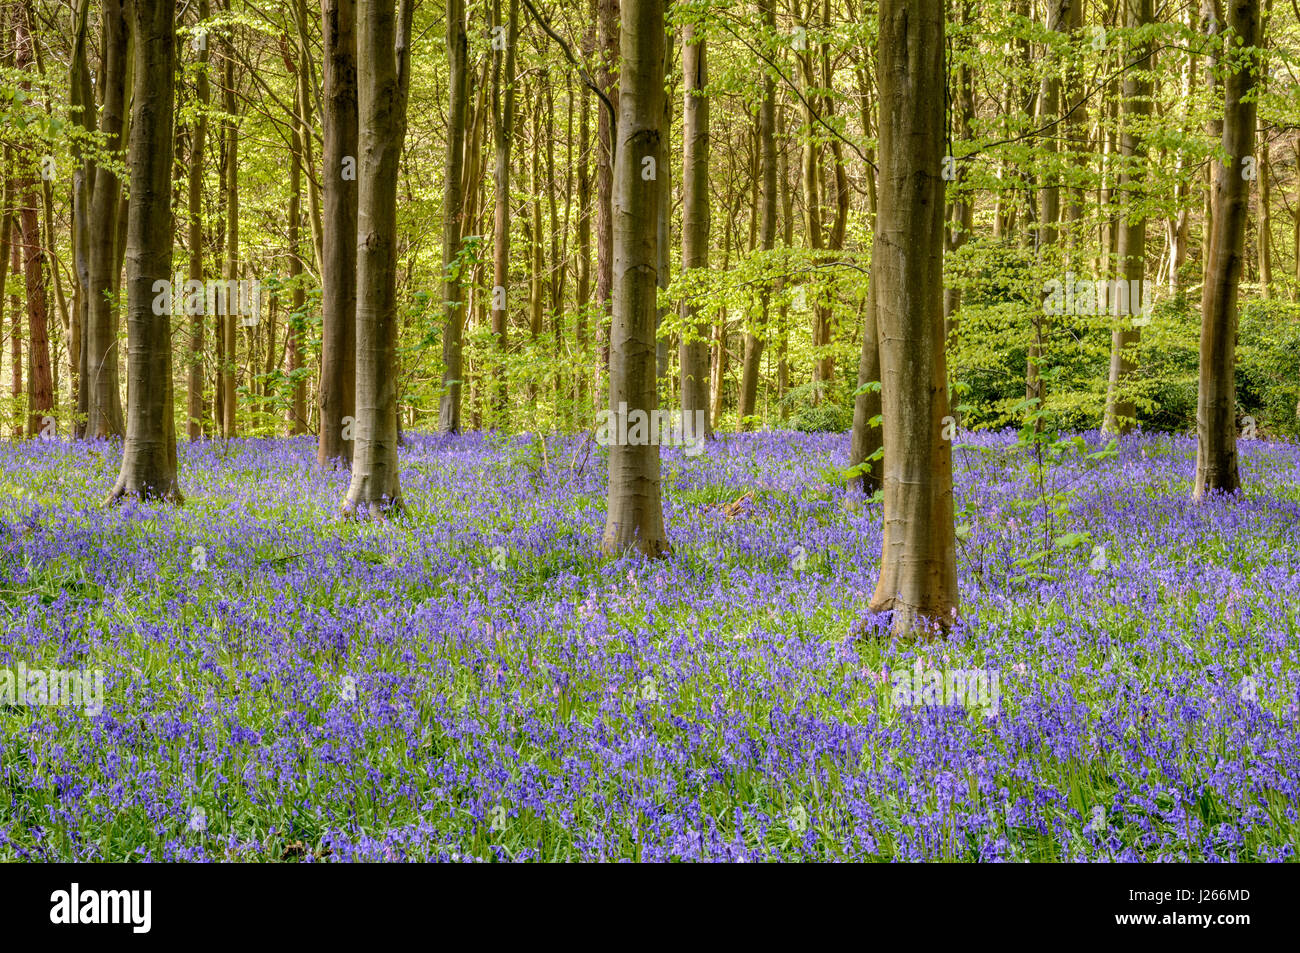 Carpet of English bluebells (Hyacinthoides non-scripta) in a beech wood in Wiltshire, England, UK Stock Photo